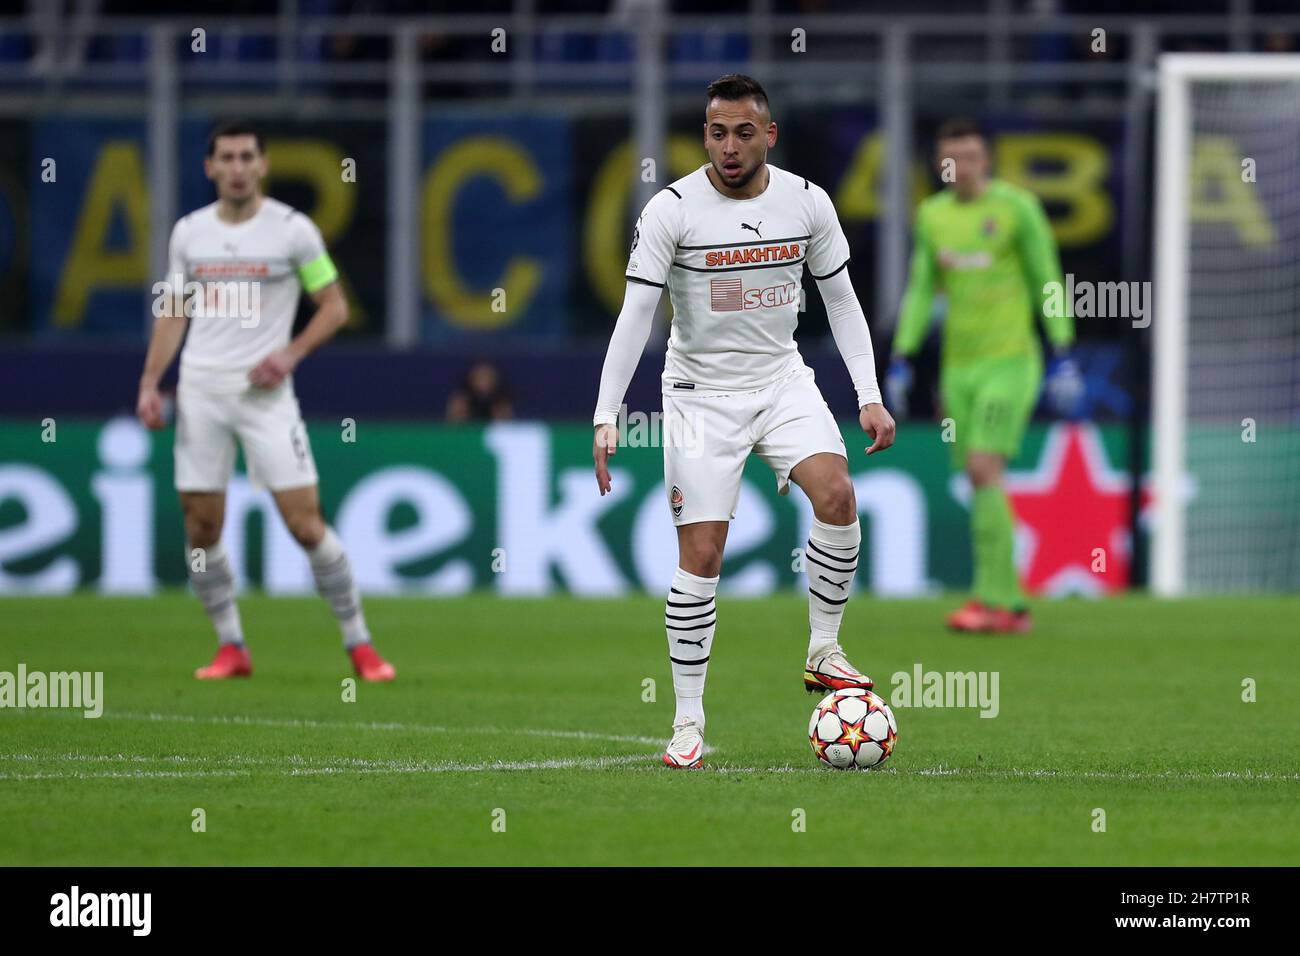 Milan, Italy. 24th Nov, 2021. Maycon of FC Shakhtar Donetsk  controls the ball during the UEFA Champions League group D match between FC Internazionale and Shakhtar Donetsk . Credit: Marco Canoniero/Alamy Live News Stock Photo